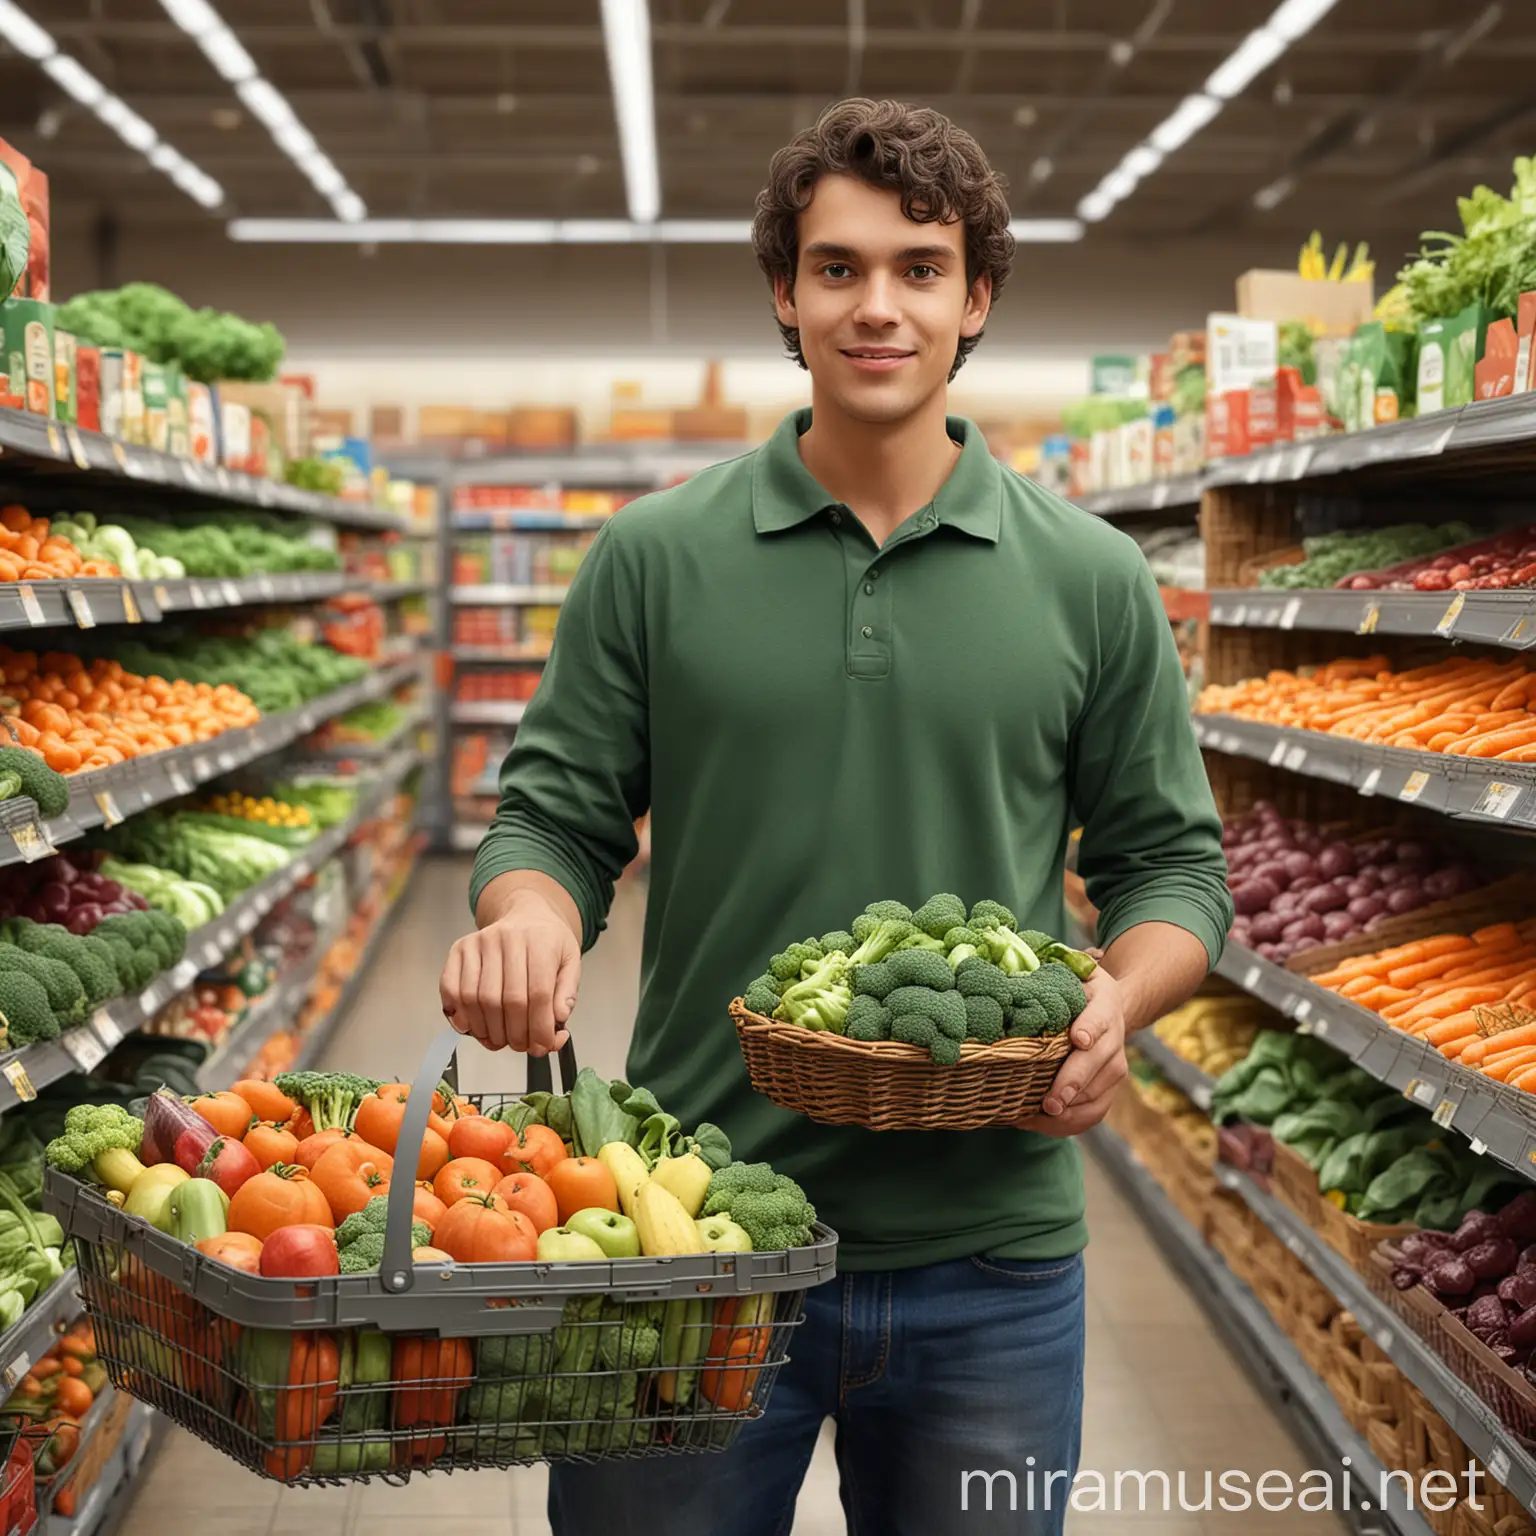 Young Manager Holding Basket of Fresh Produce in WellStocked Grocery Store